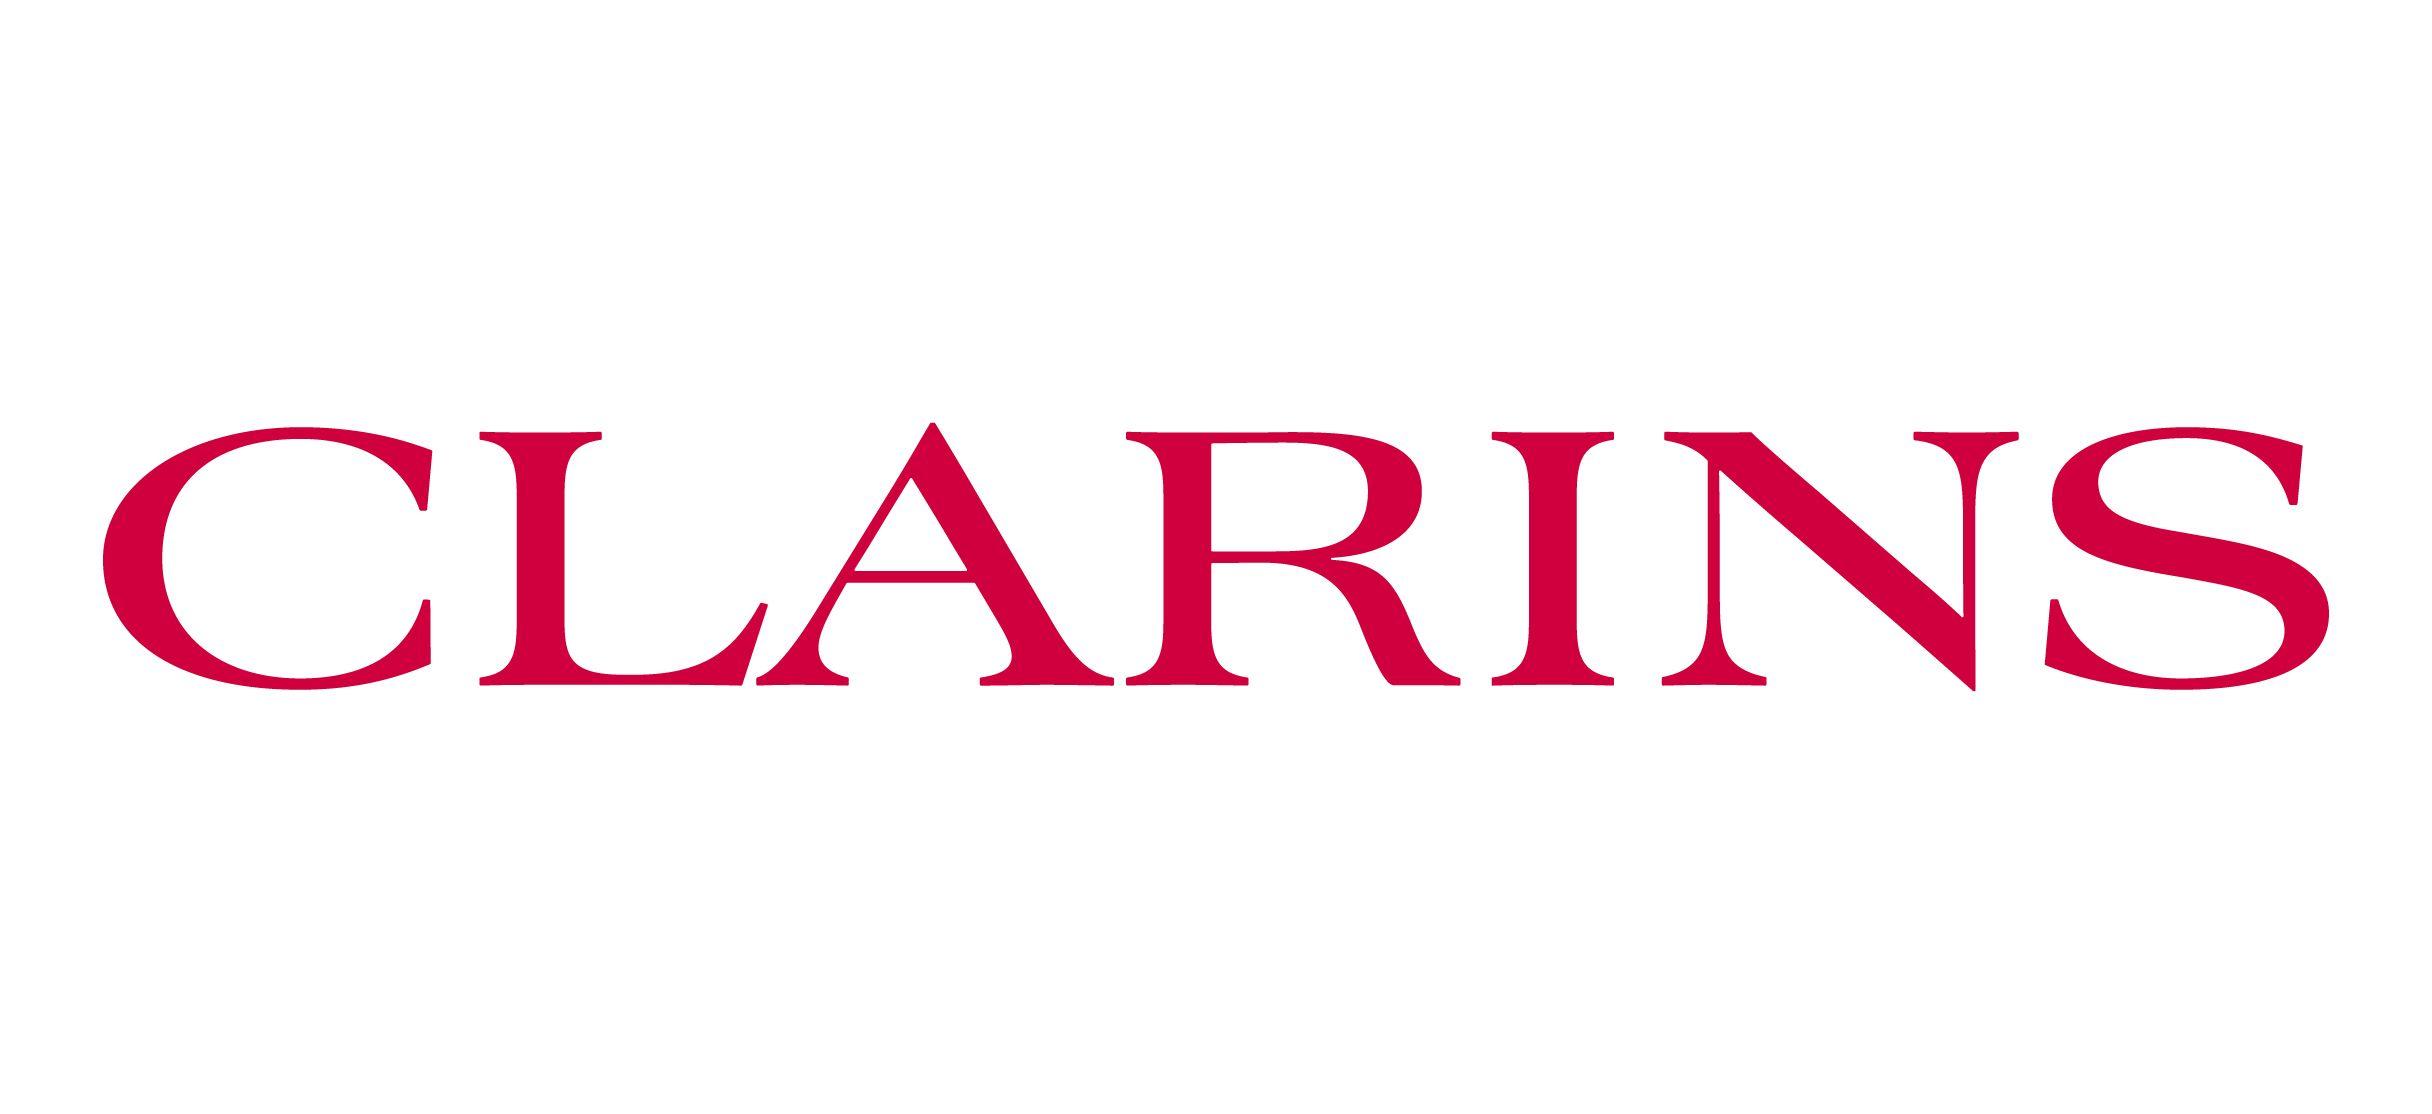 French Cosmetic Company Logo - Recruitment & Employment Confederation - Clarins